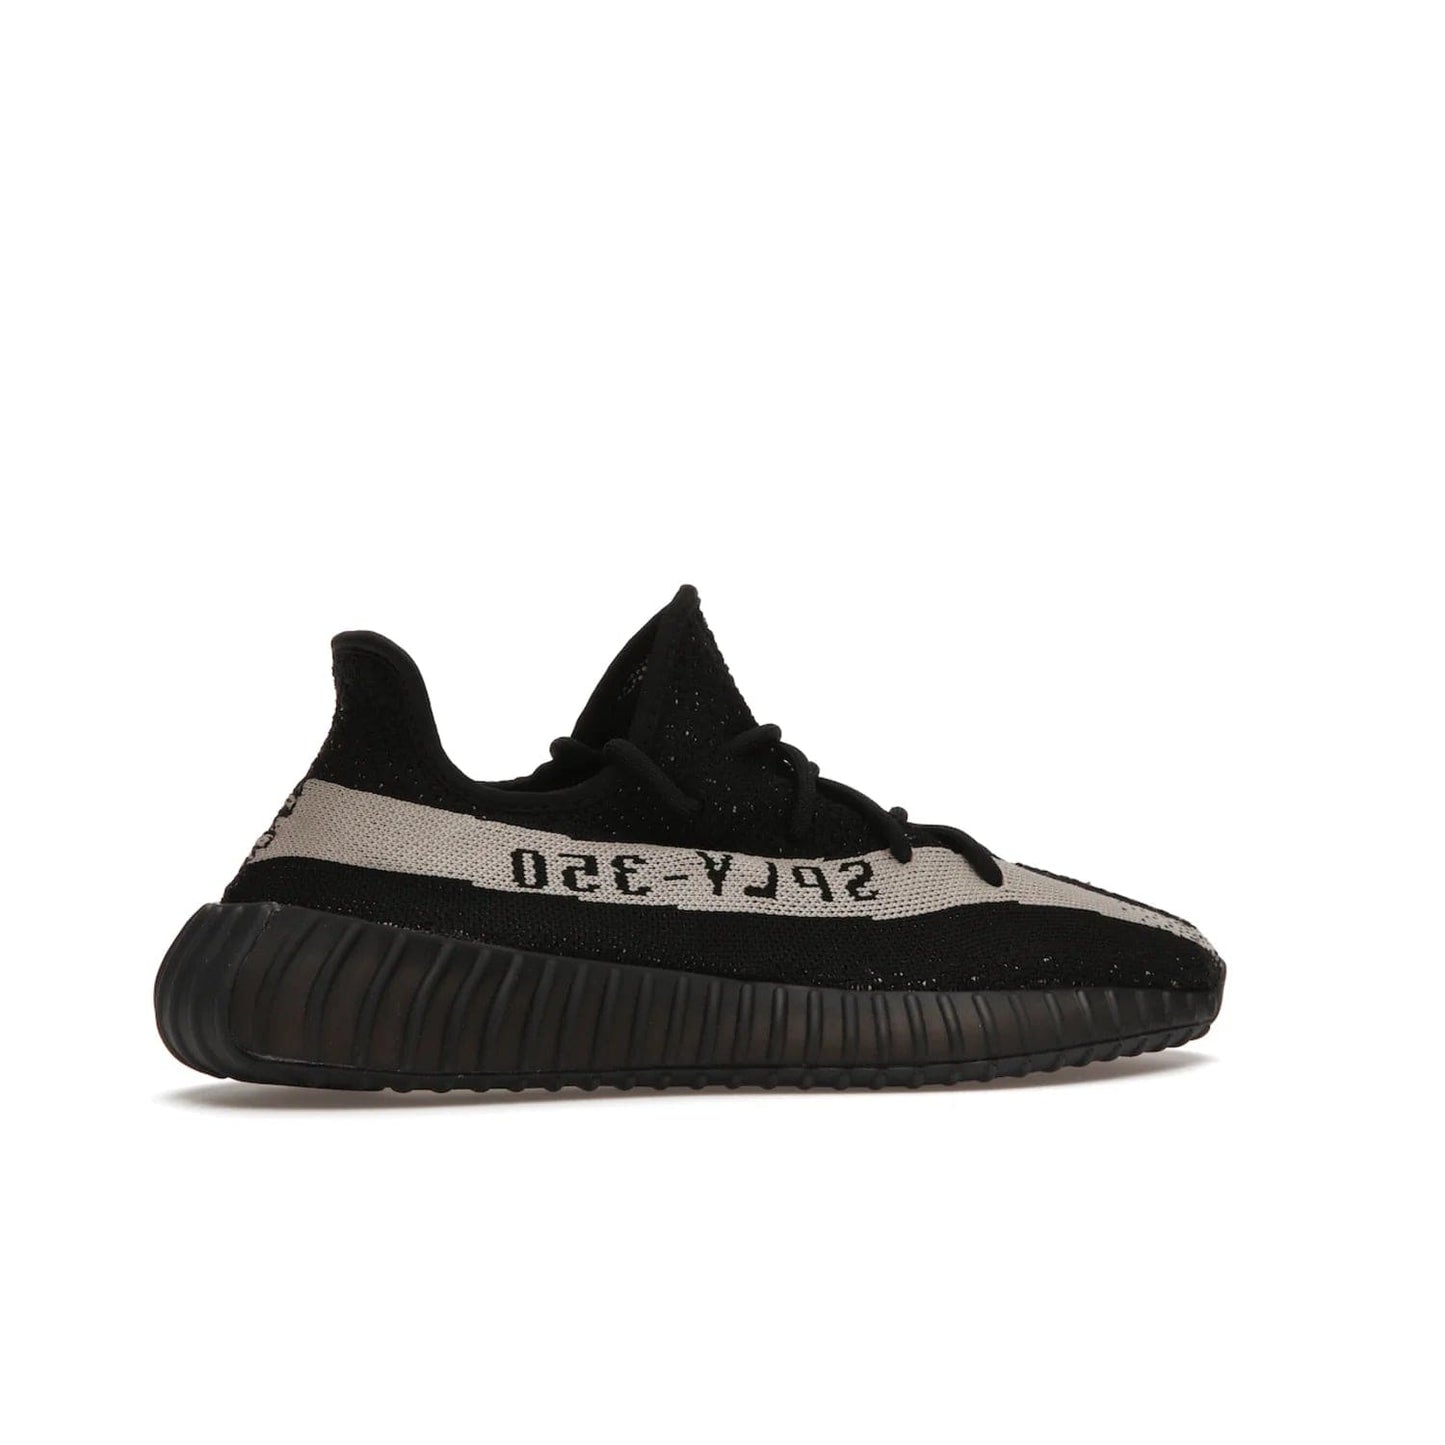 adidas Yeezy Boost 350 V2 Core Black White (2016/2022) - Image 35 - Only at www.BallersClubKickz.com - Stylish adidas Yeezy Boost 350 V2 in classic black with white "SPLY-350" stitched to the side stripe. Features Primeknit upper & Boost sole for comfort. Restock in March 2022.